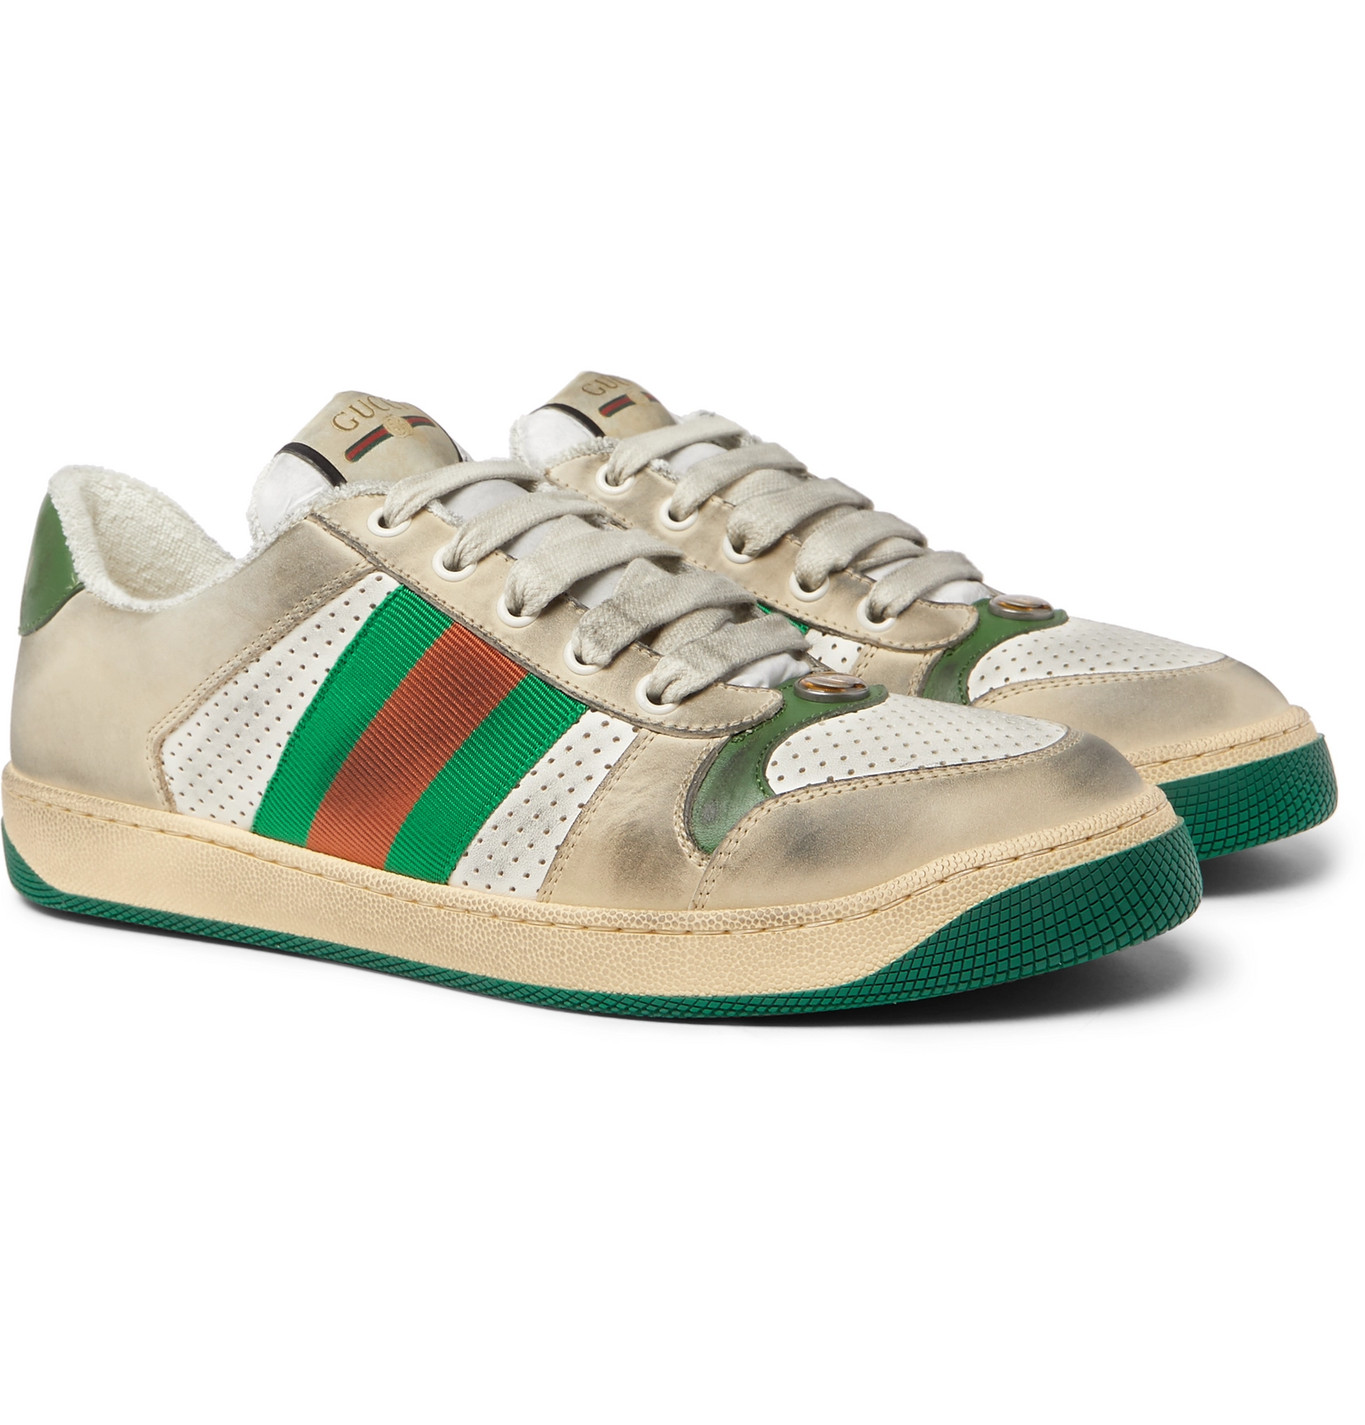 Gucci - Virtus Distressed Leather and 